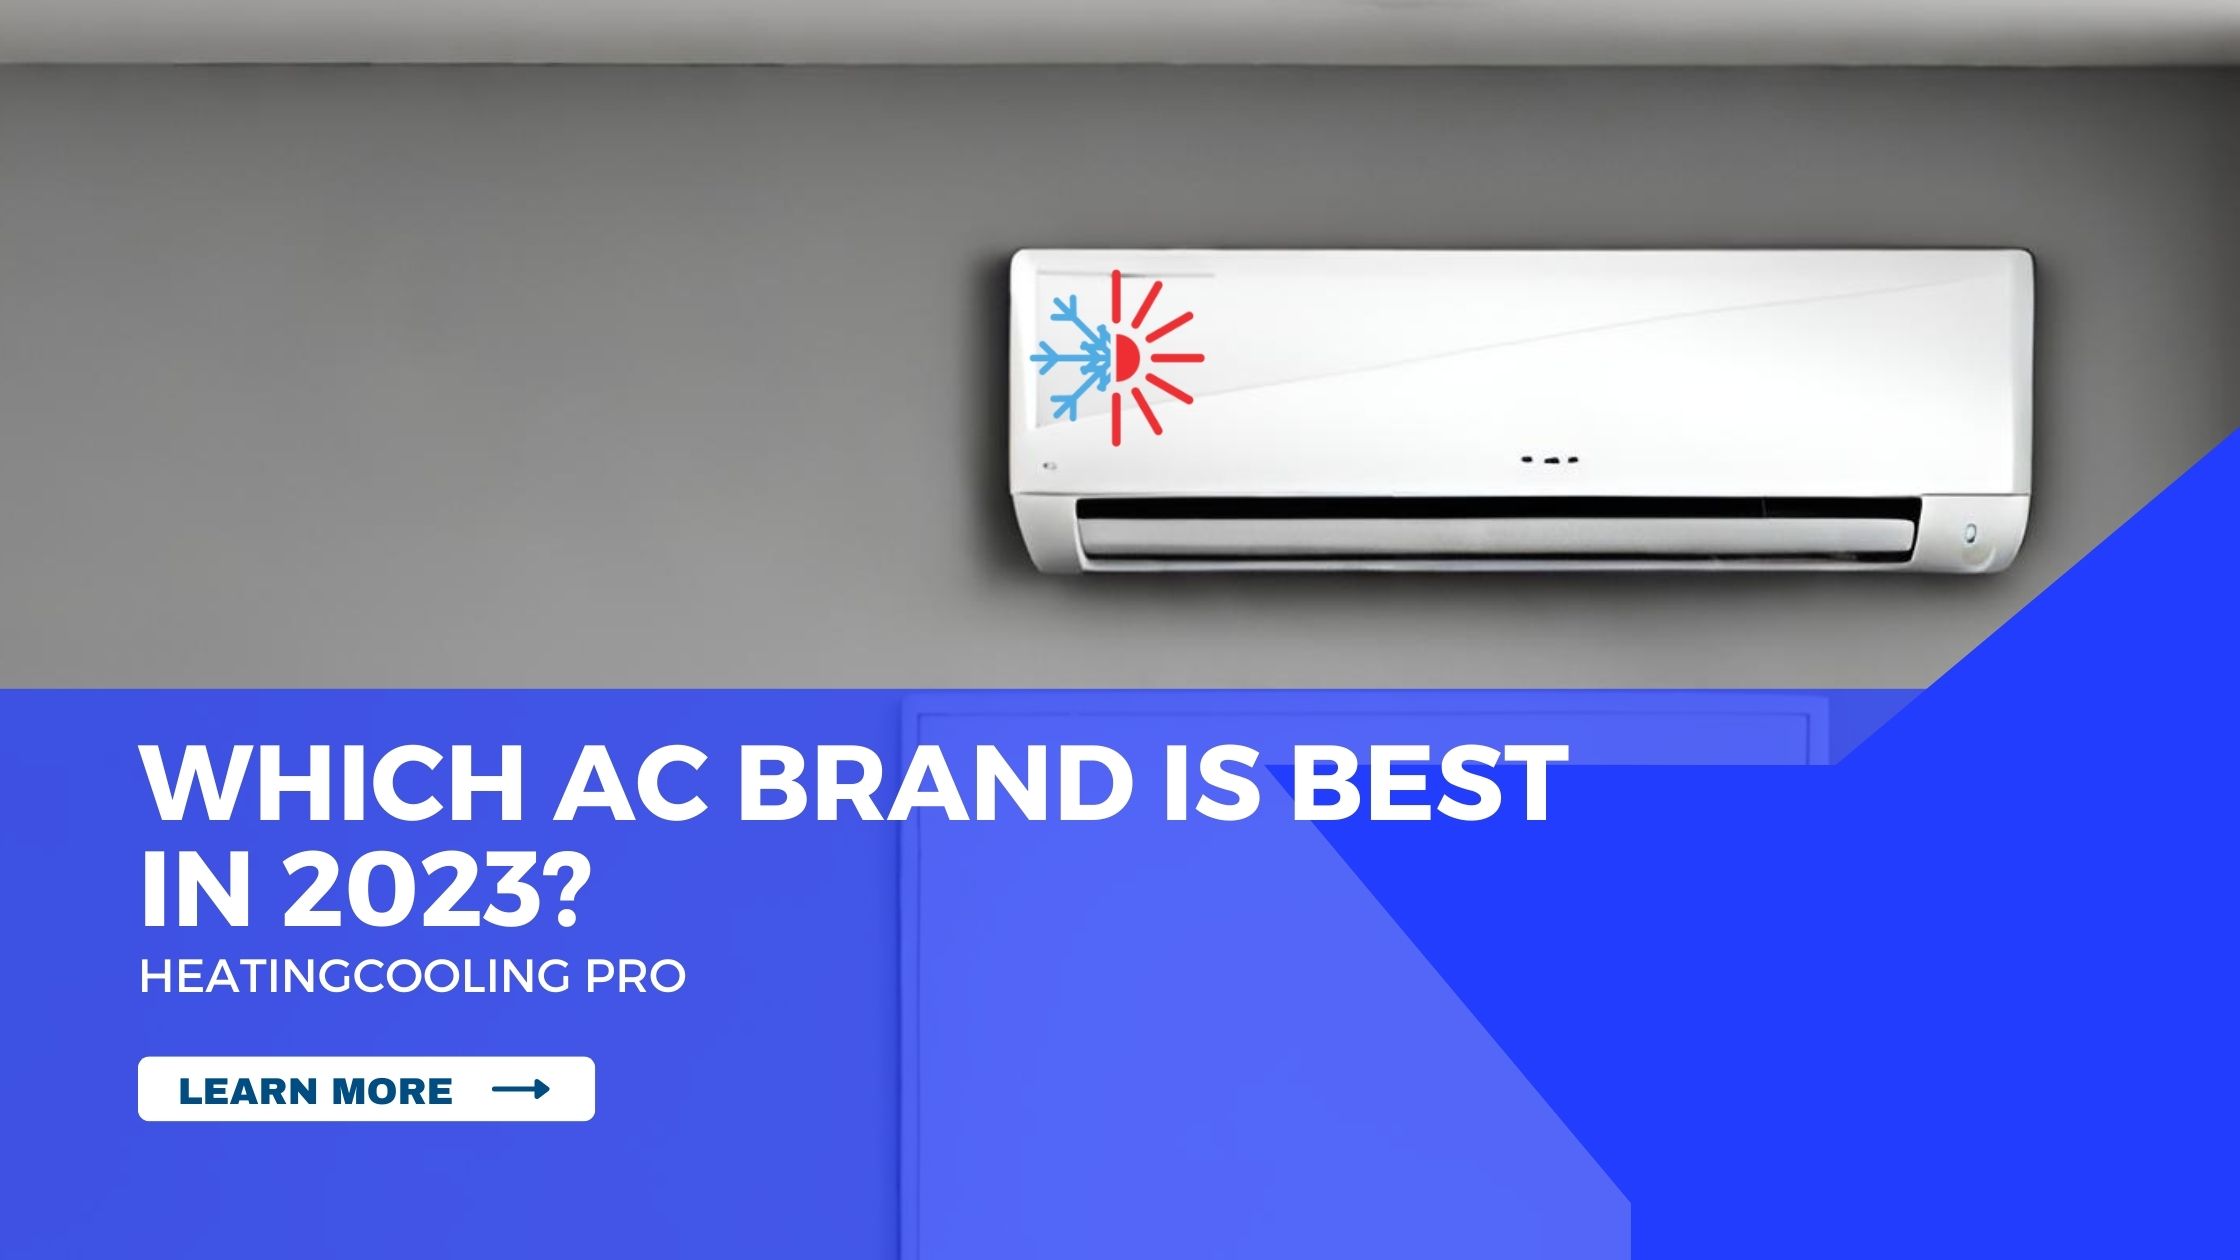 Which Ac Brand Is Best In 2023?